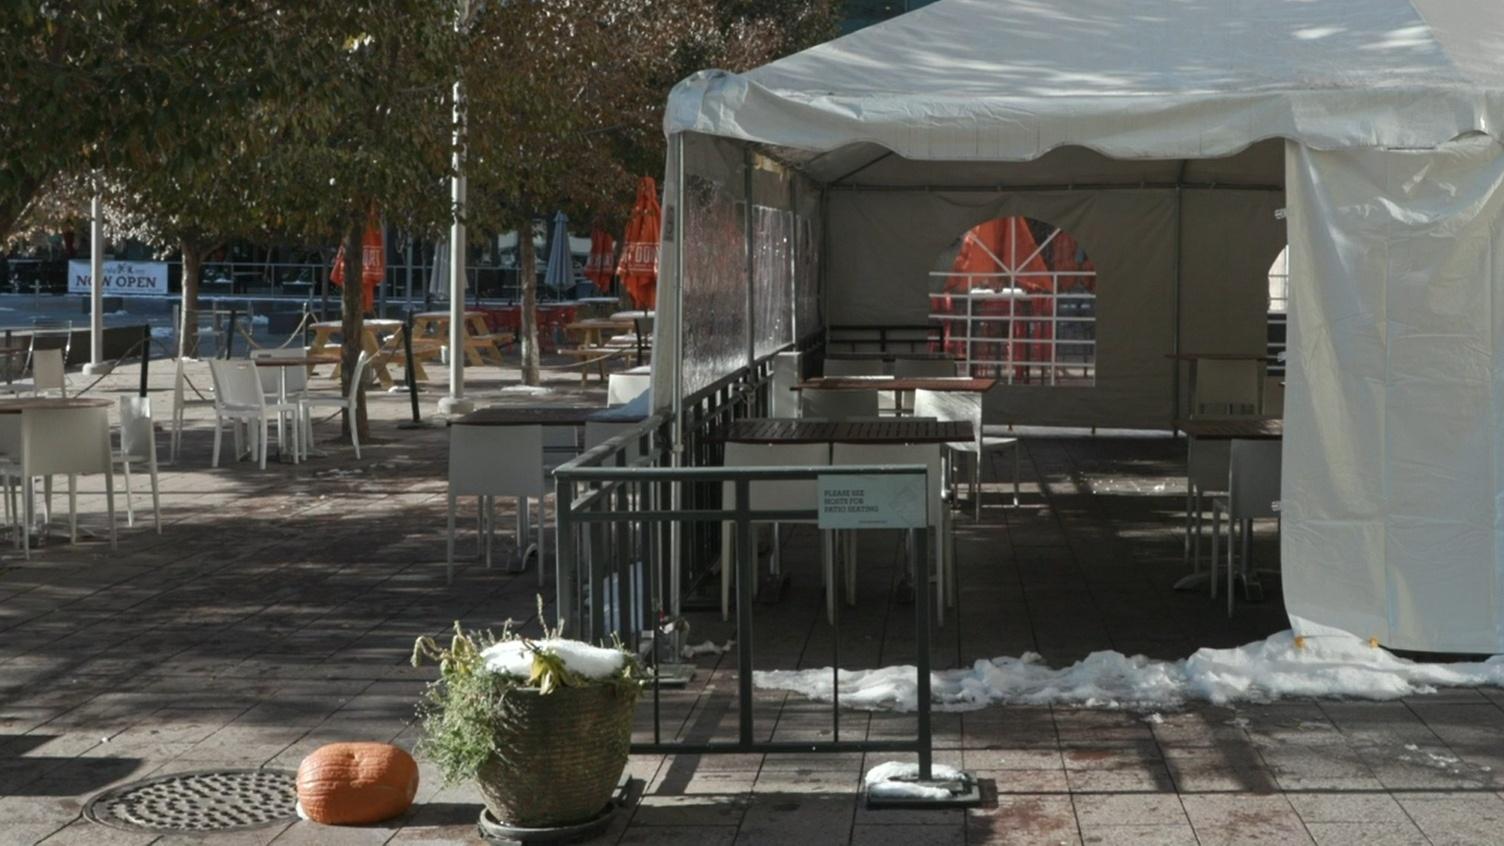 Denver's outdoor dining program is here to stay.